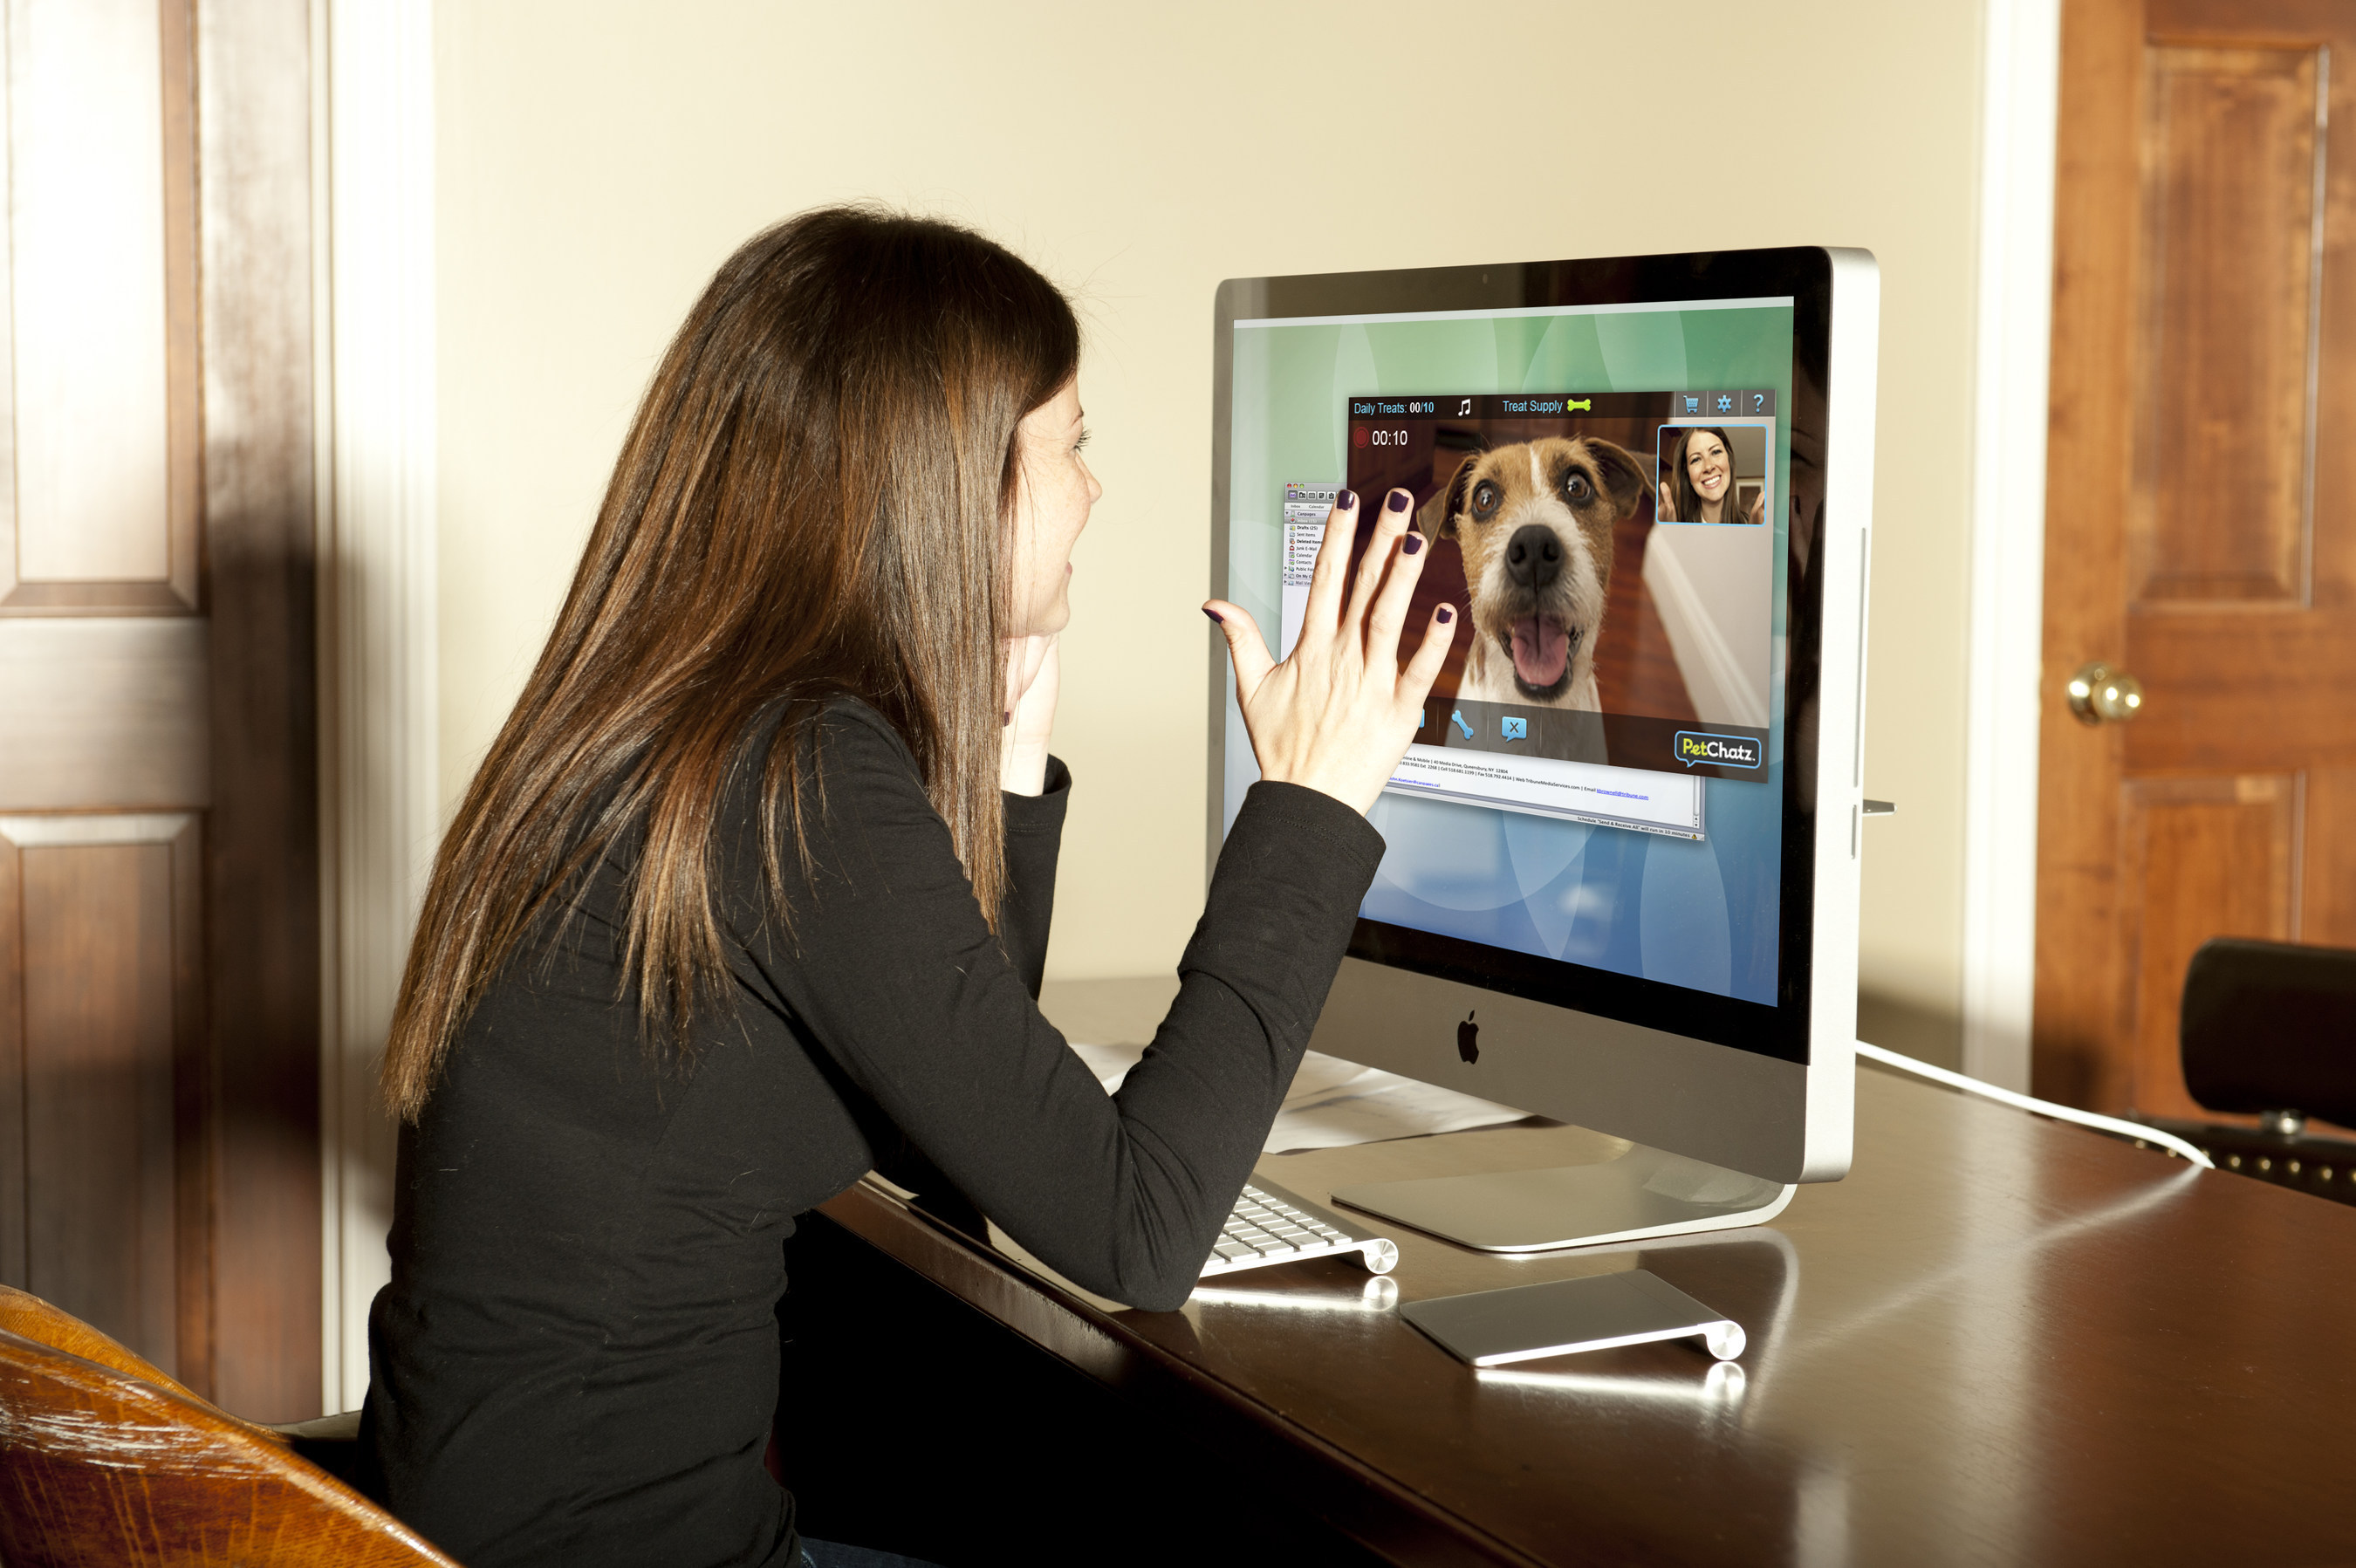 PetChatz is a first-of-kind Greet & Treat videophone that allows pet parents to interact with their pet from anywhere. With PetChatz, you can see, hear, speak to, provide a comforting scent and give your pet a treat using a smart phone or computer.